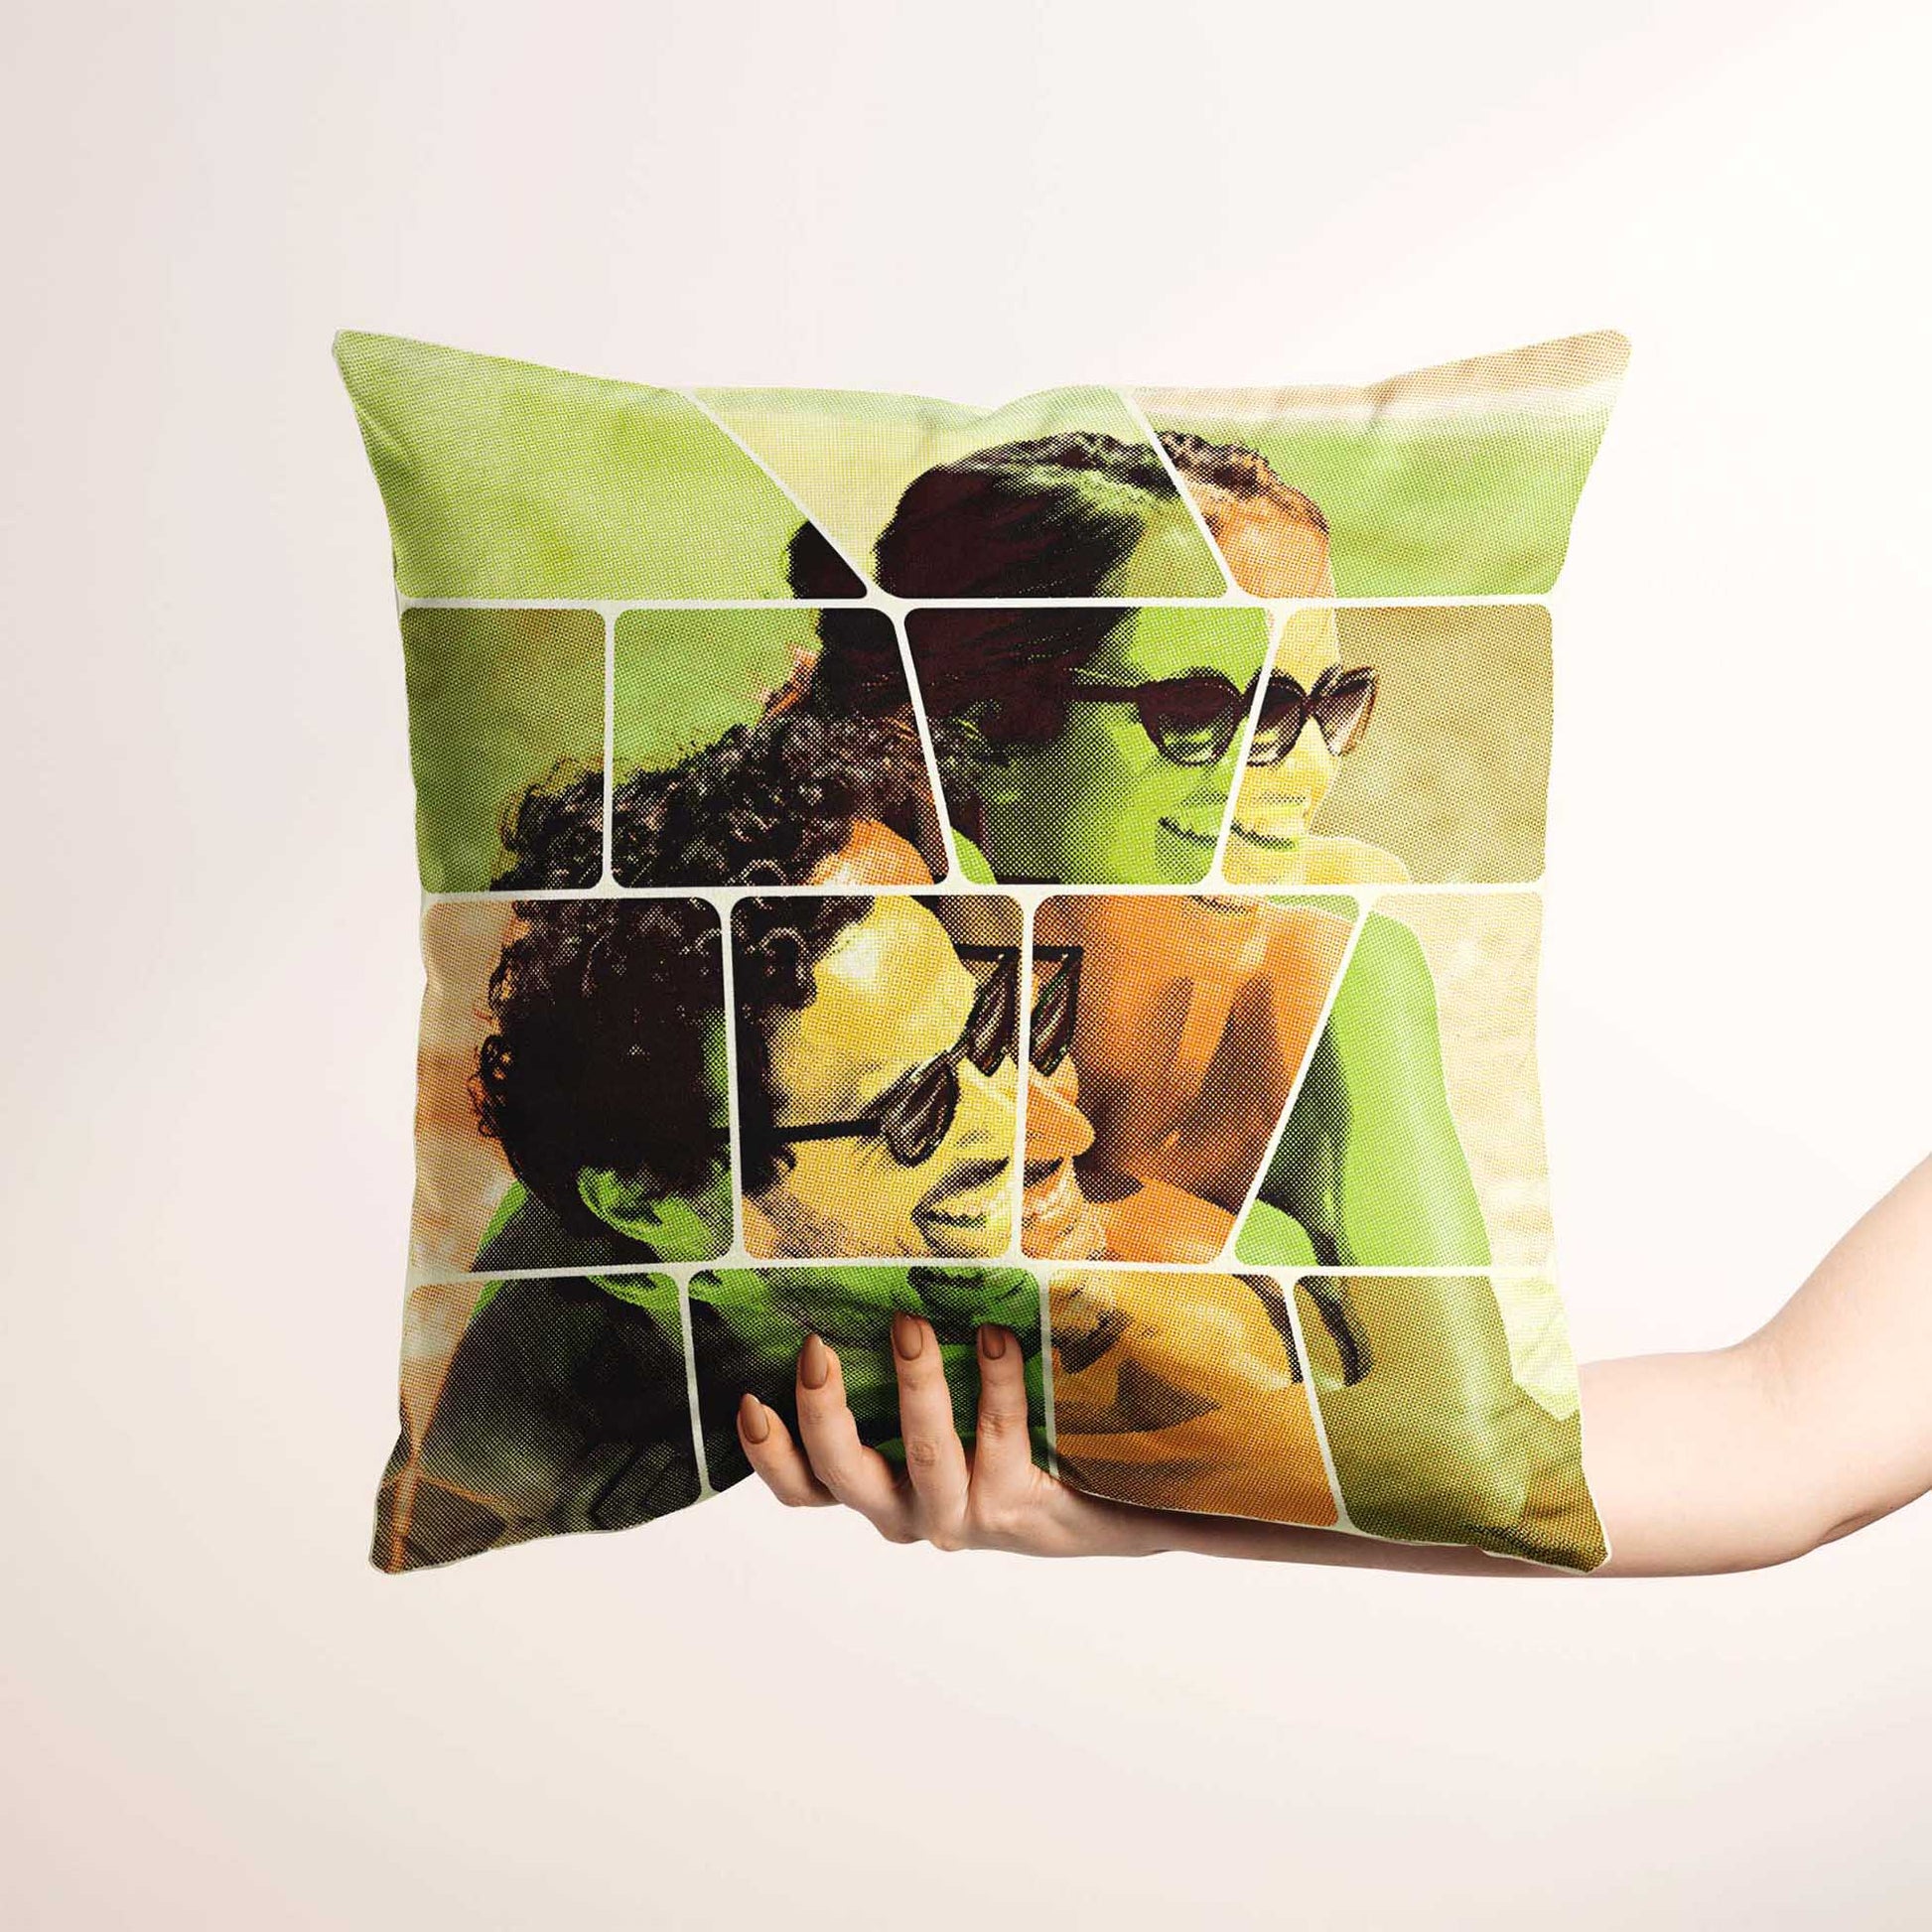 Create a chic and stylish atmosphere with the Personalised Vintage Comics Cushion. Its cartoon design, created from your photo, exudes a fresh and cool energy with its vibrant orange and green colors. Made from soft velvet